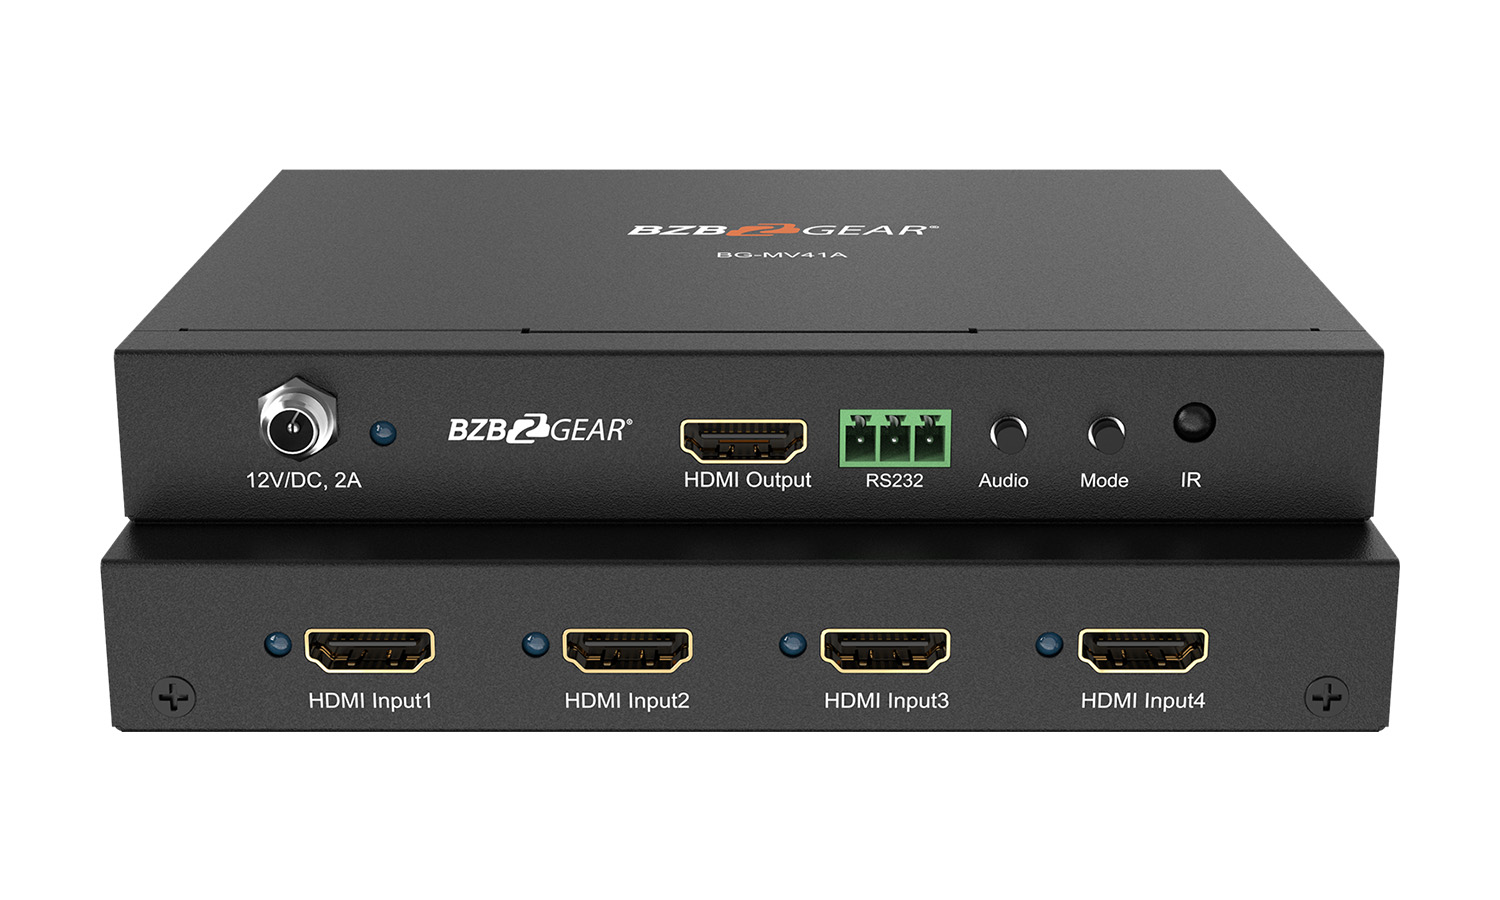 BZBGEAR BG-MV41A 4X1 1080P Full HD Multiviewer with Scaler and RS-232 Support